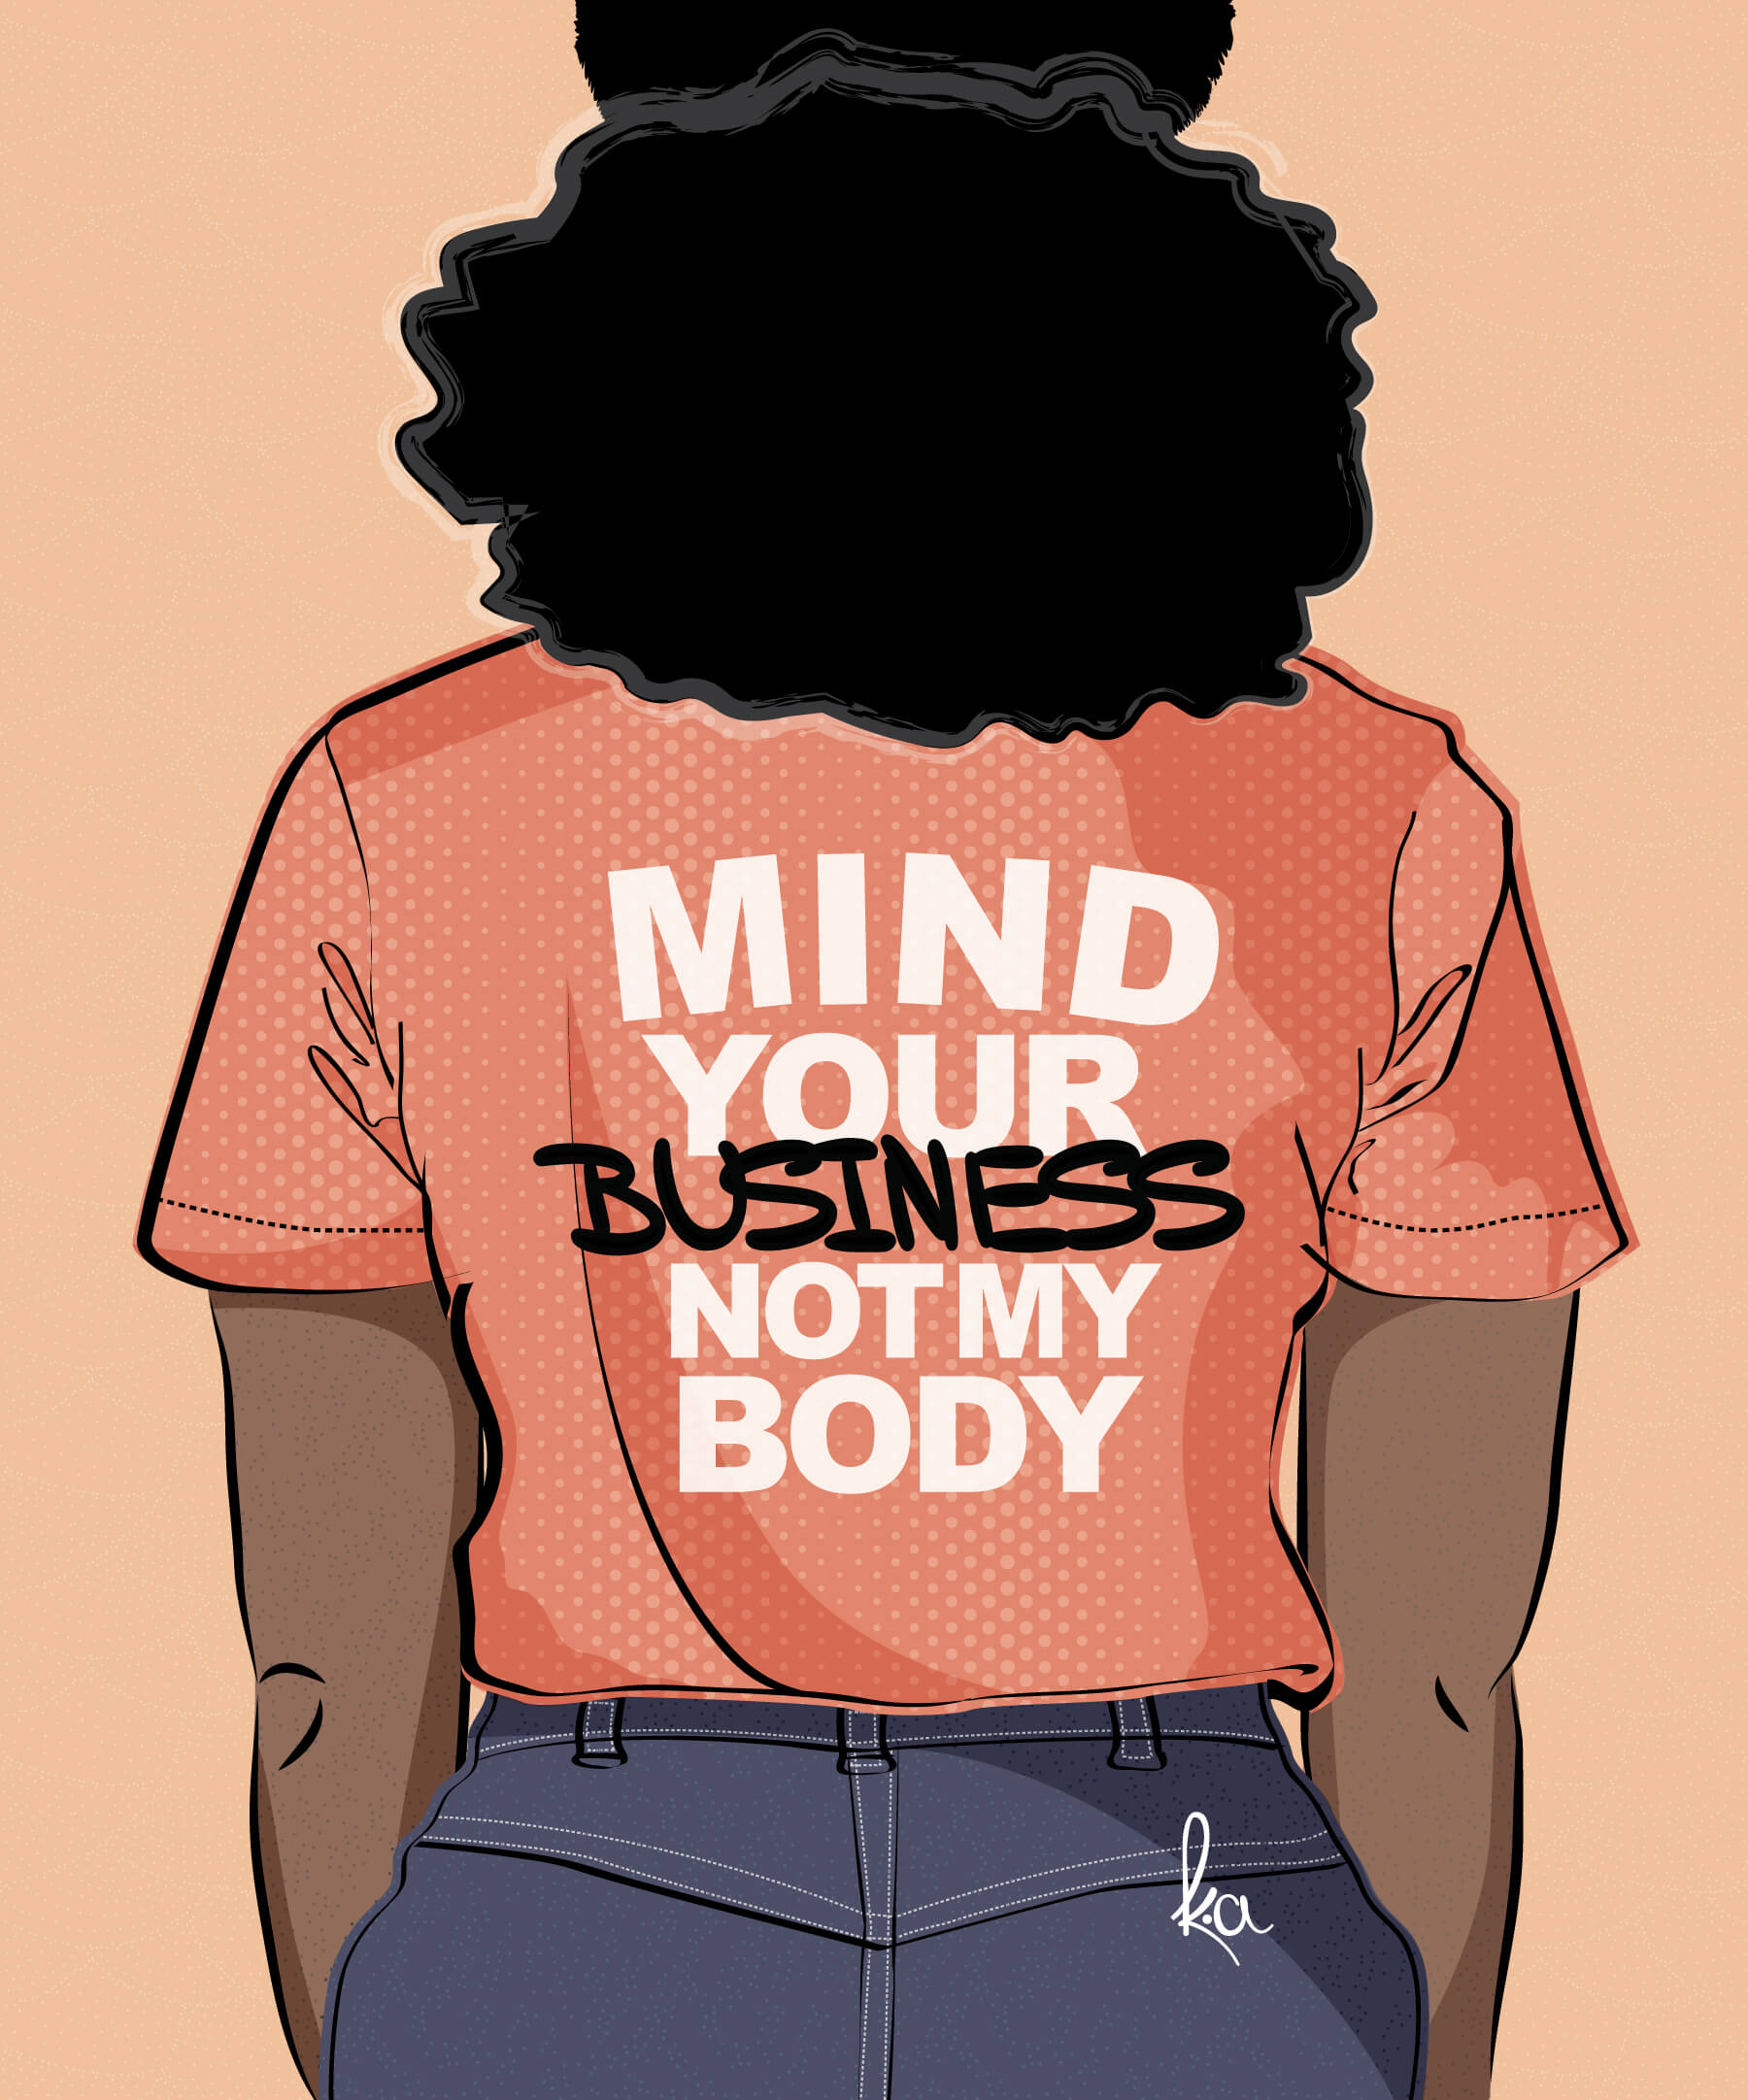 mind your business not my body illustration-she illustrates